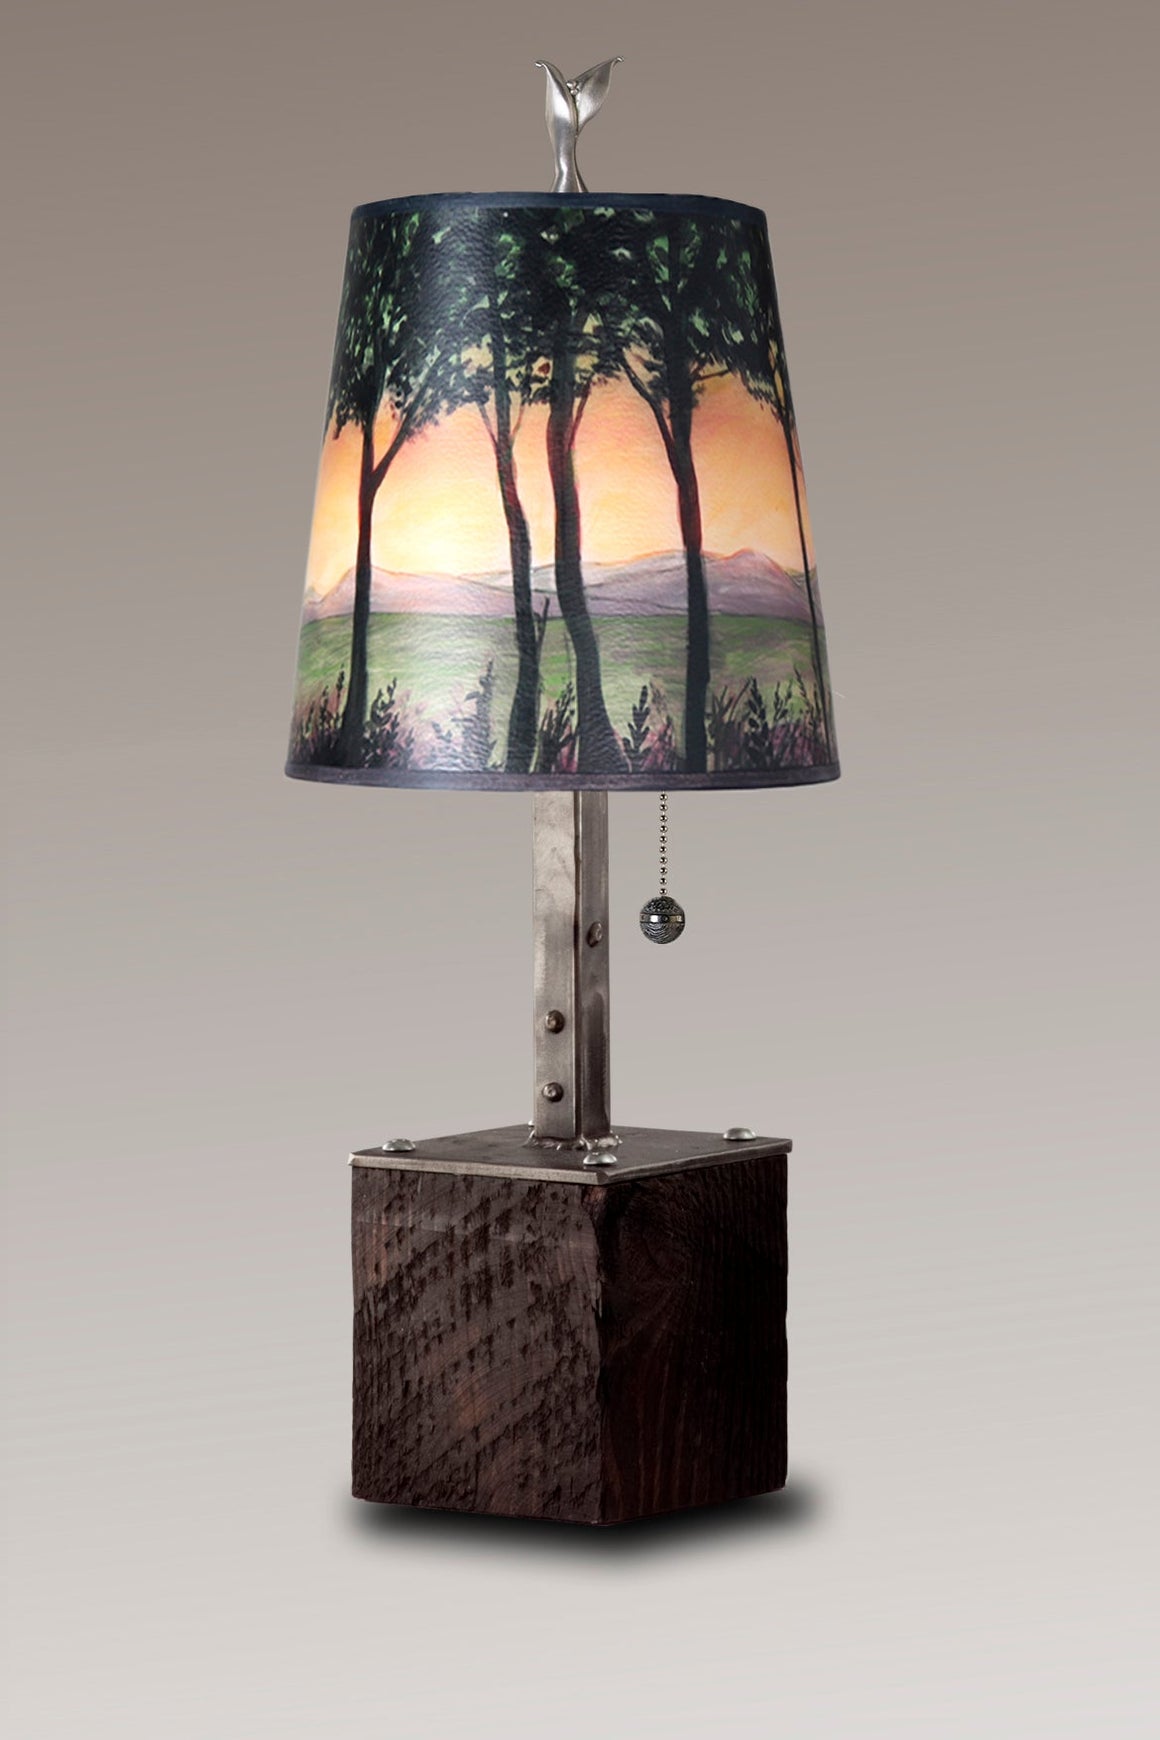 Steel Table Lamp on Reclaimed Wood with Small Drum Shade in Dawn